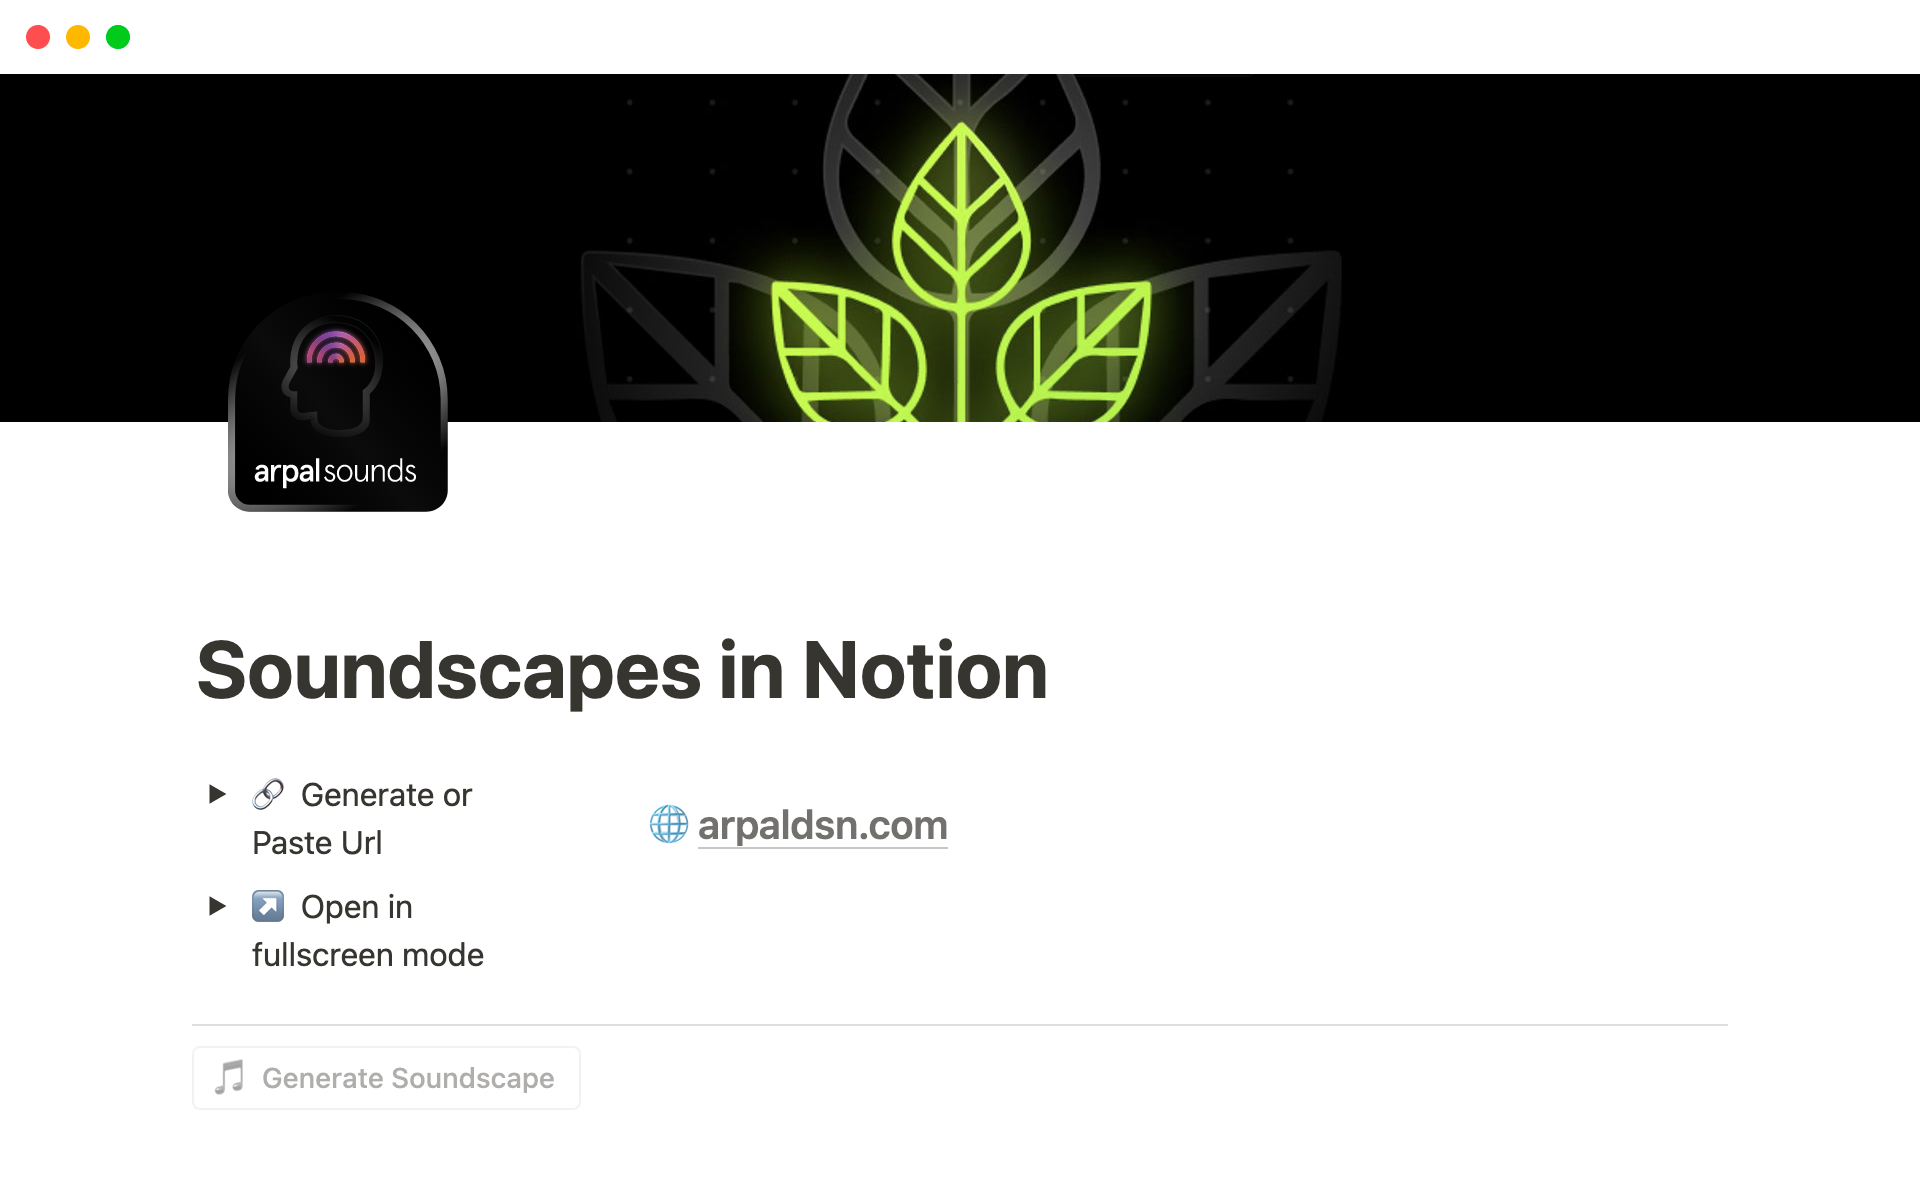 Embed productive soundscapes for your spaces in Notion.